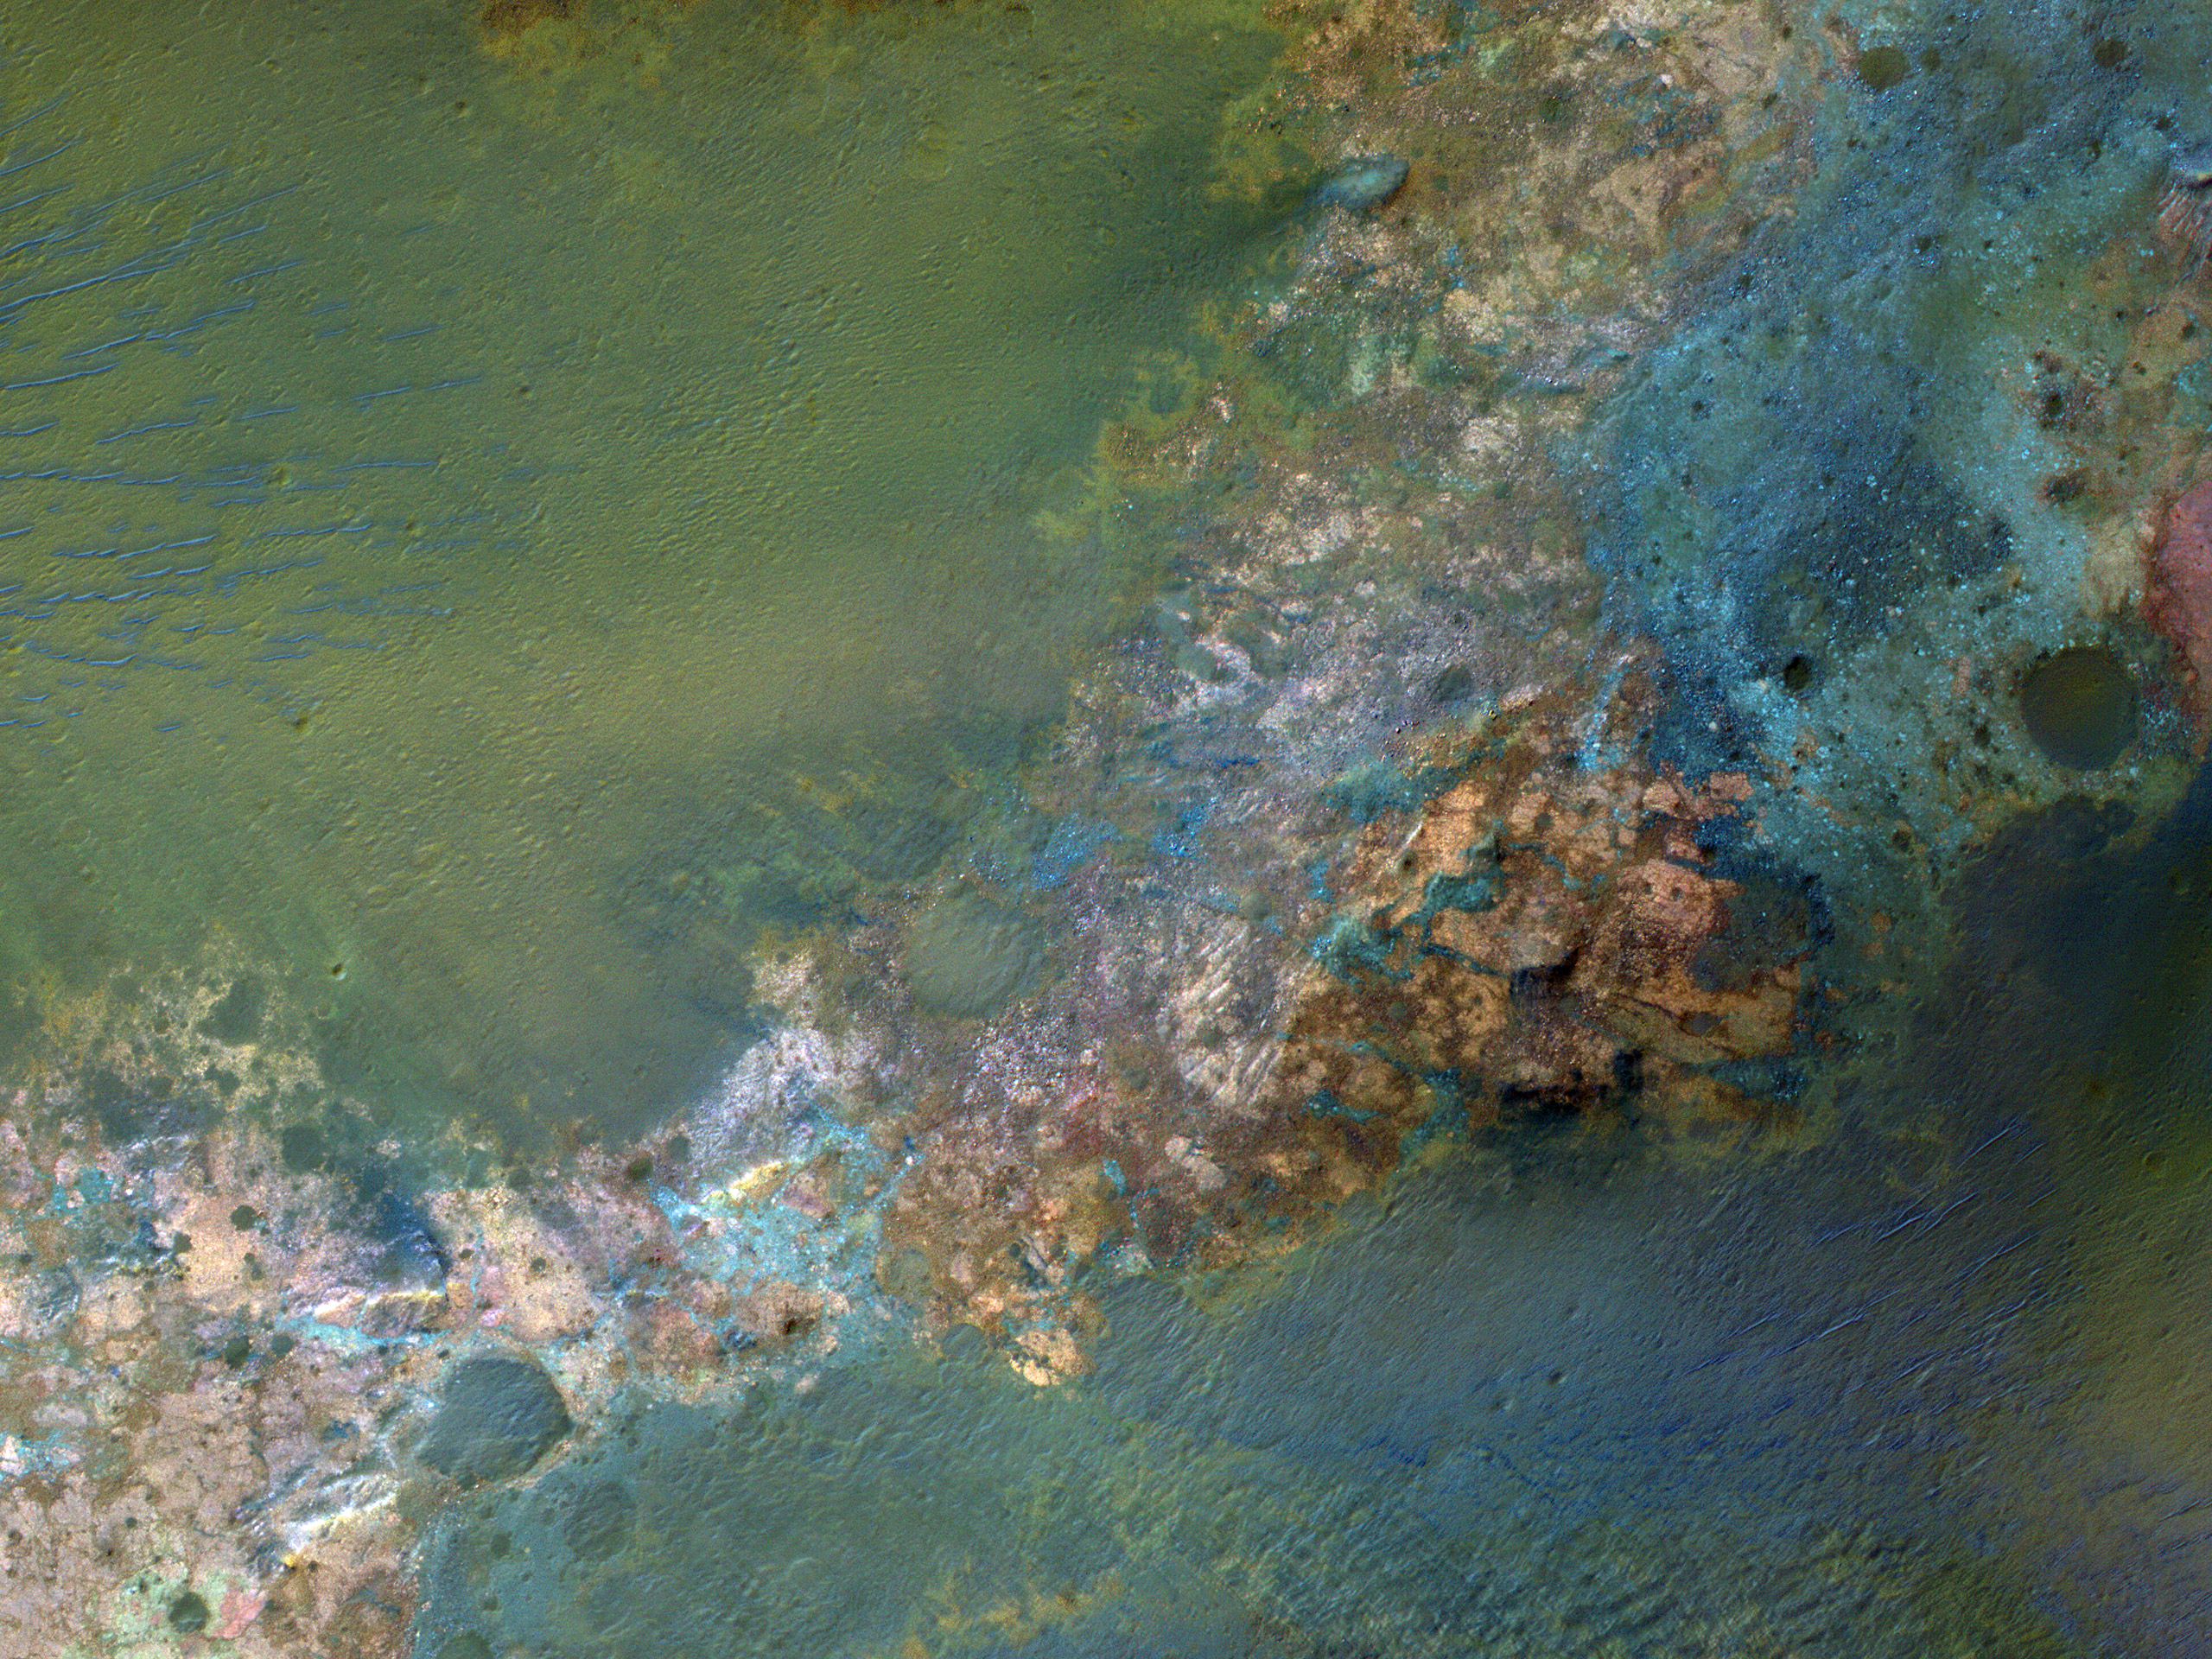 Colorful Bedrock in the Central Uplift of an Impact Crater